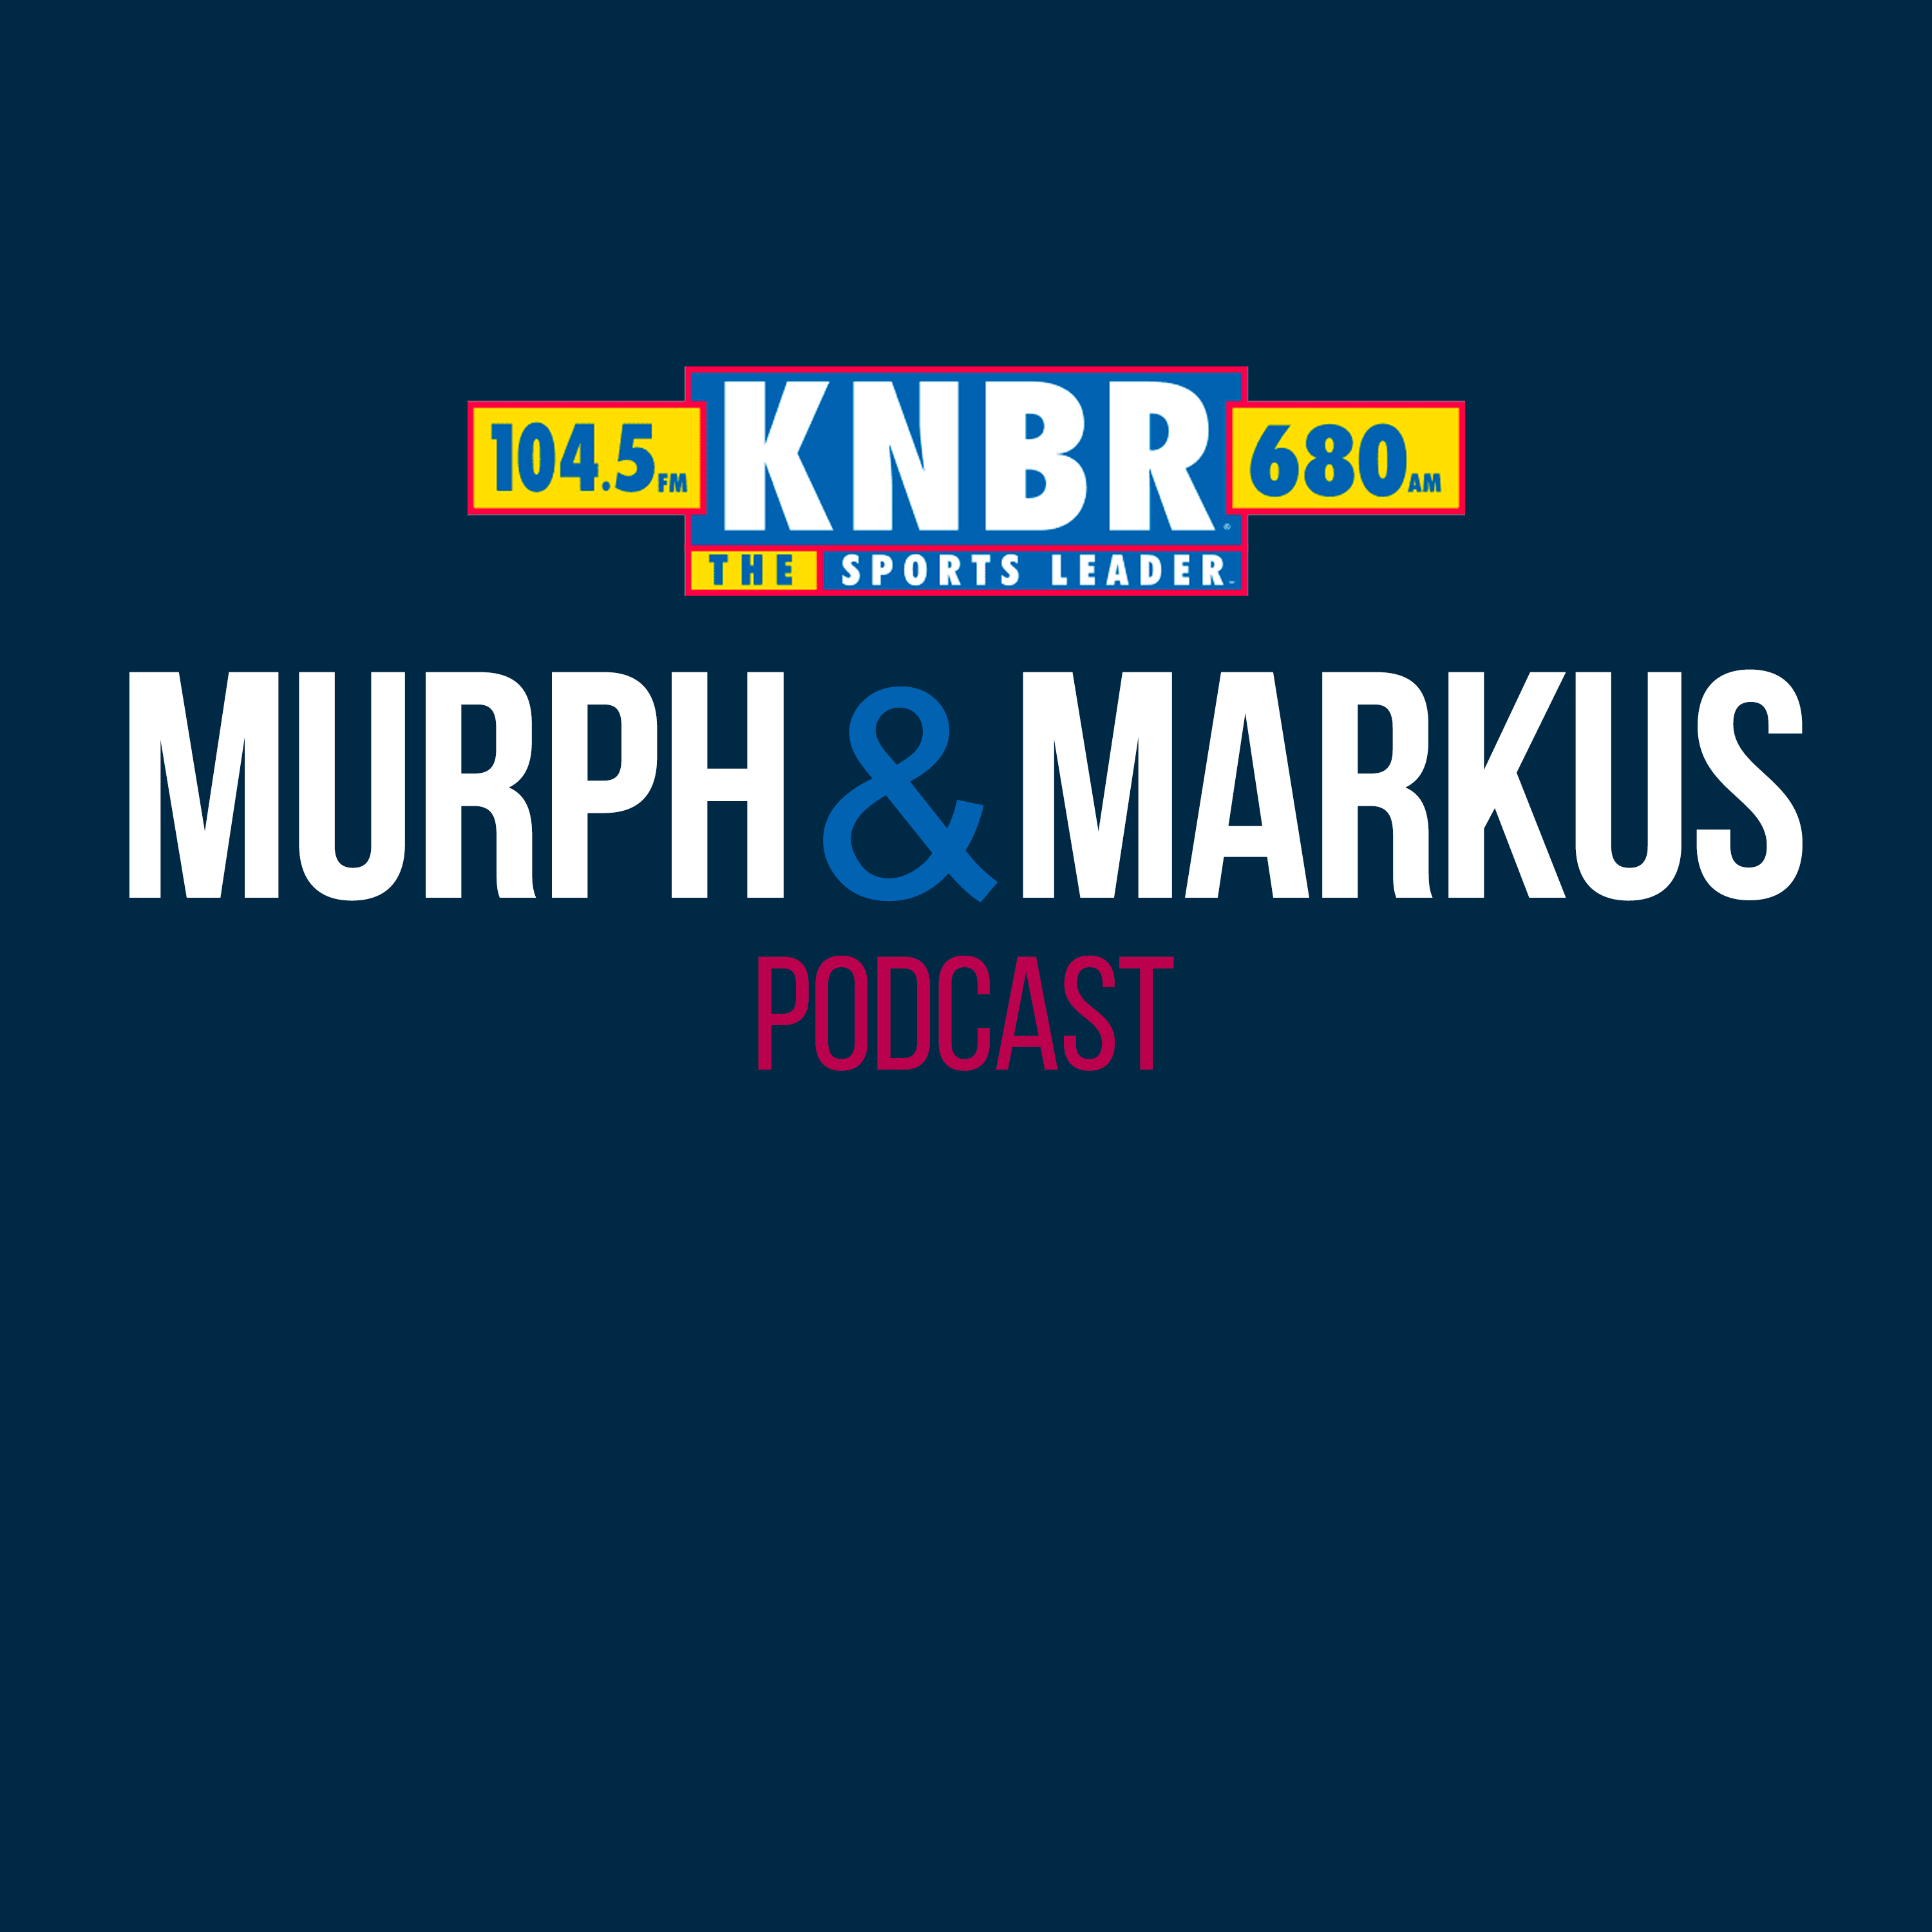 6-25 Hour 3: Murph & Markus dive into the Cooler of Content, talk to Shawn Estes, and then Marc Spears